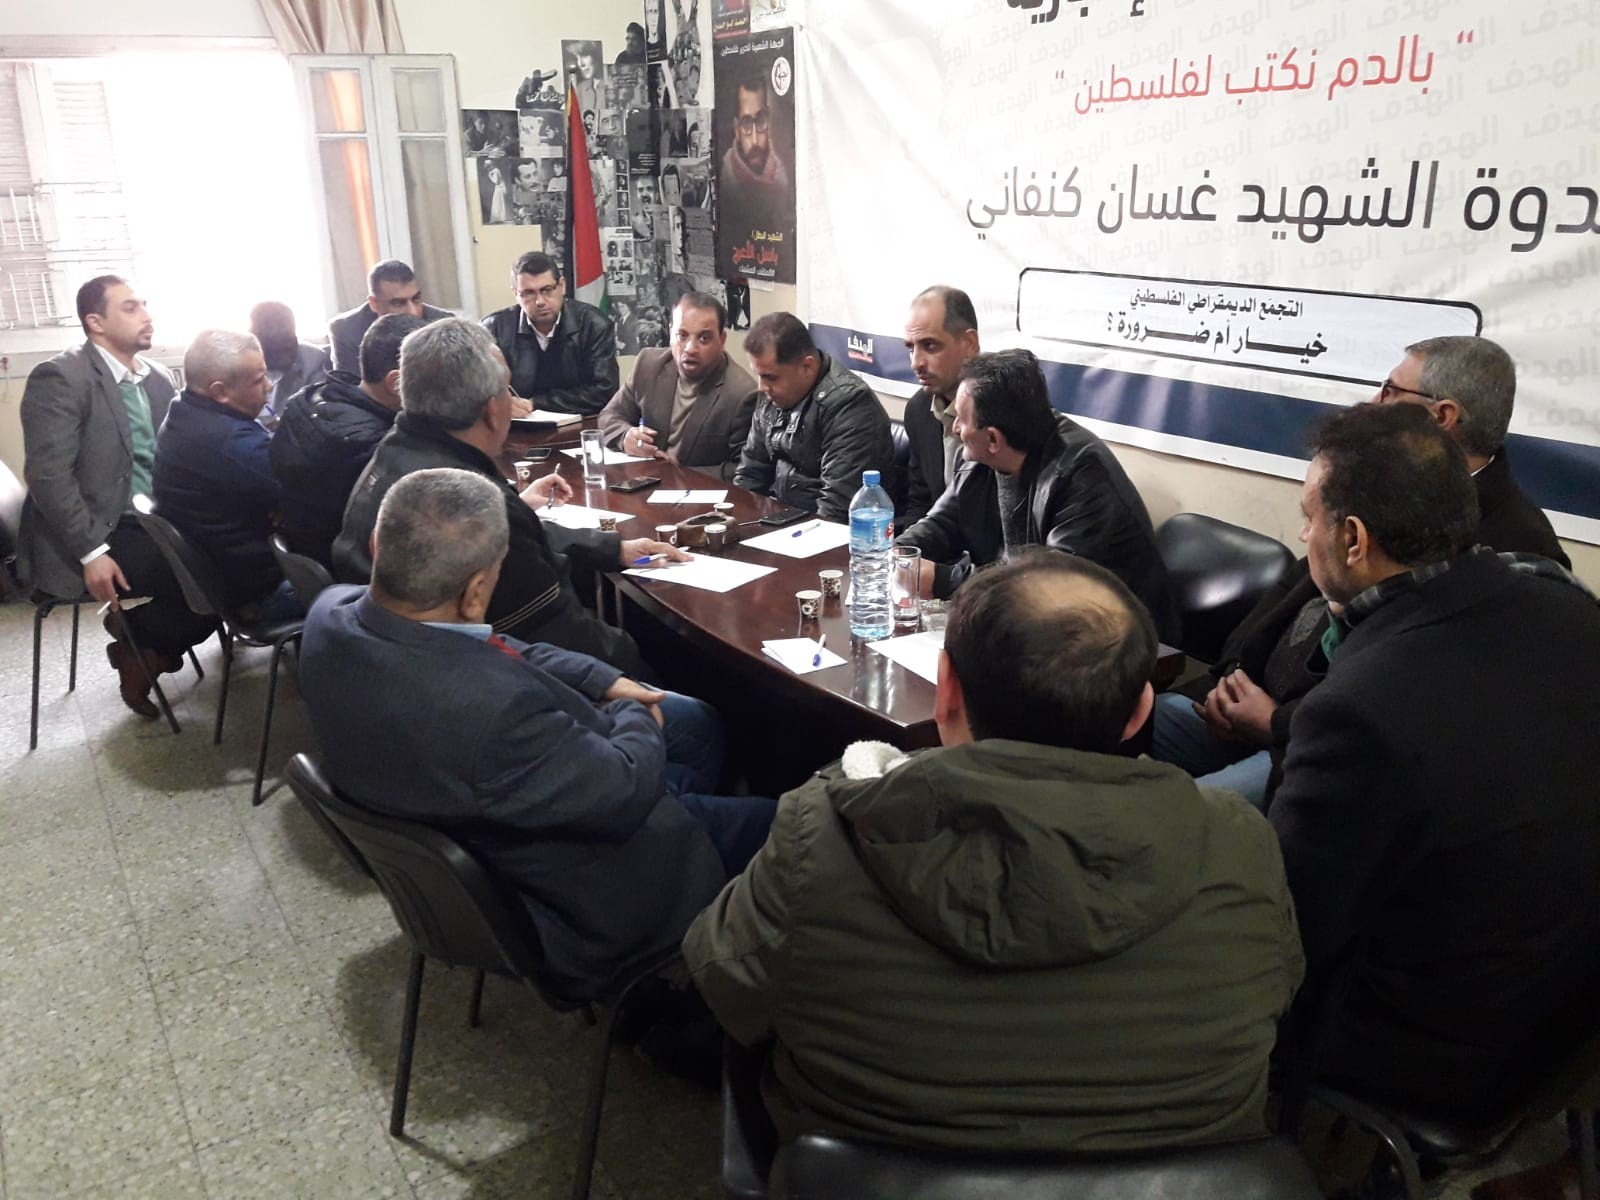 (BAS) participates in an emergency meeting of Press institutions